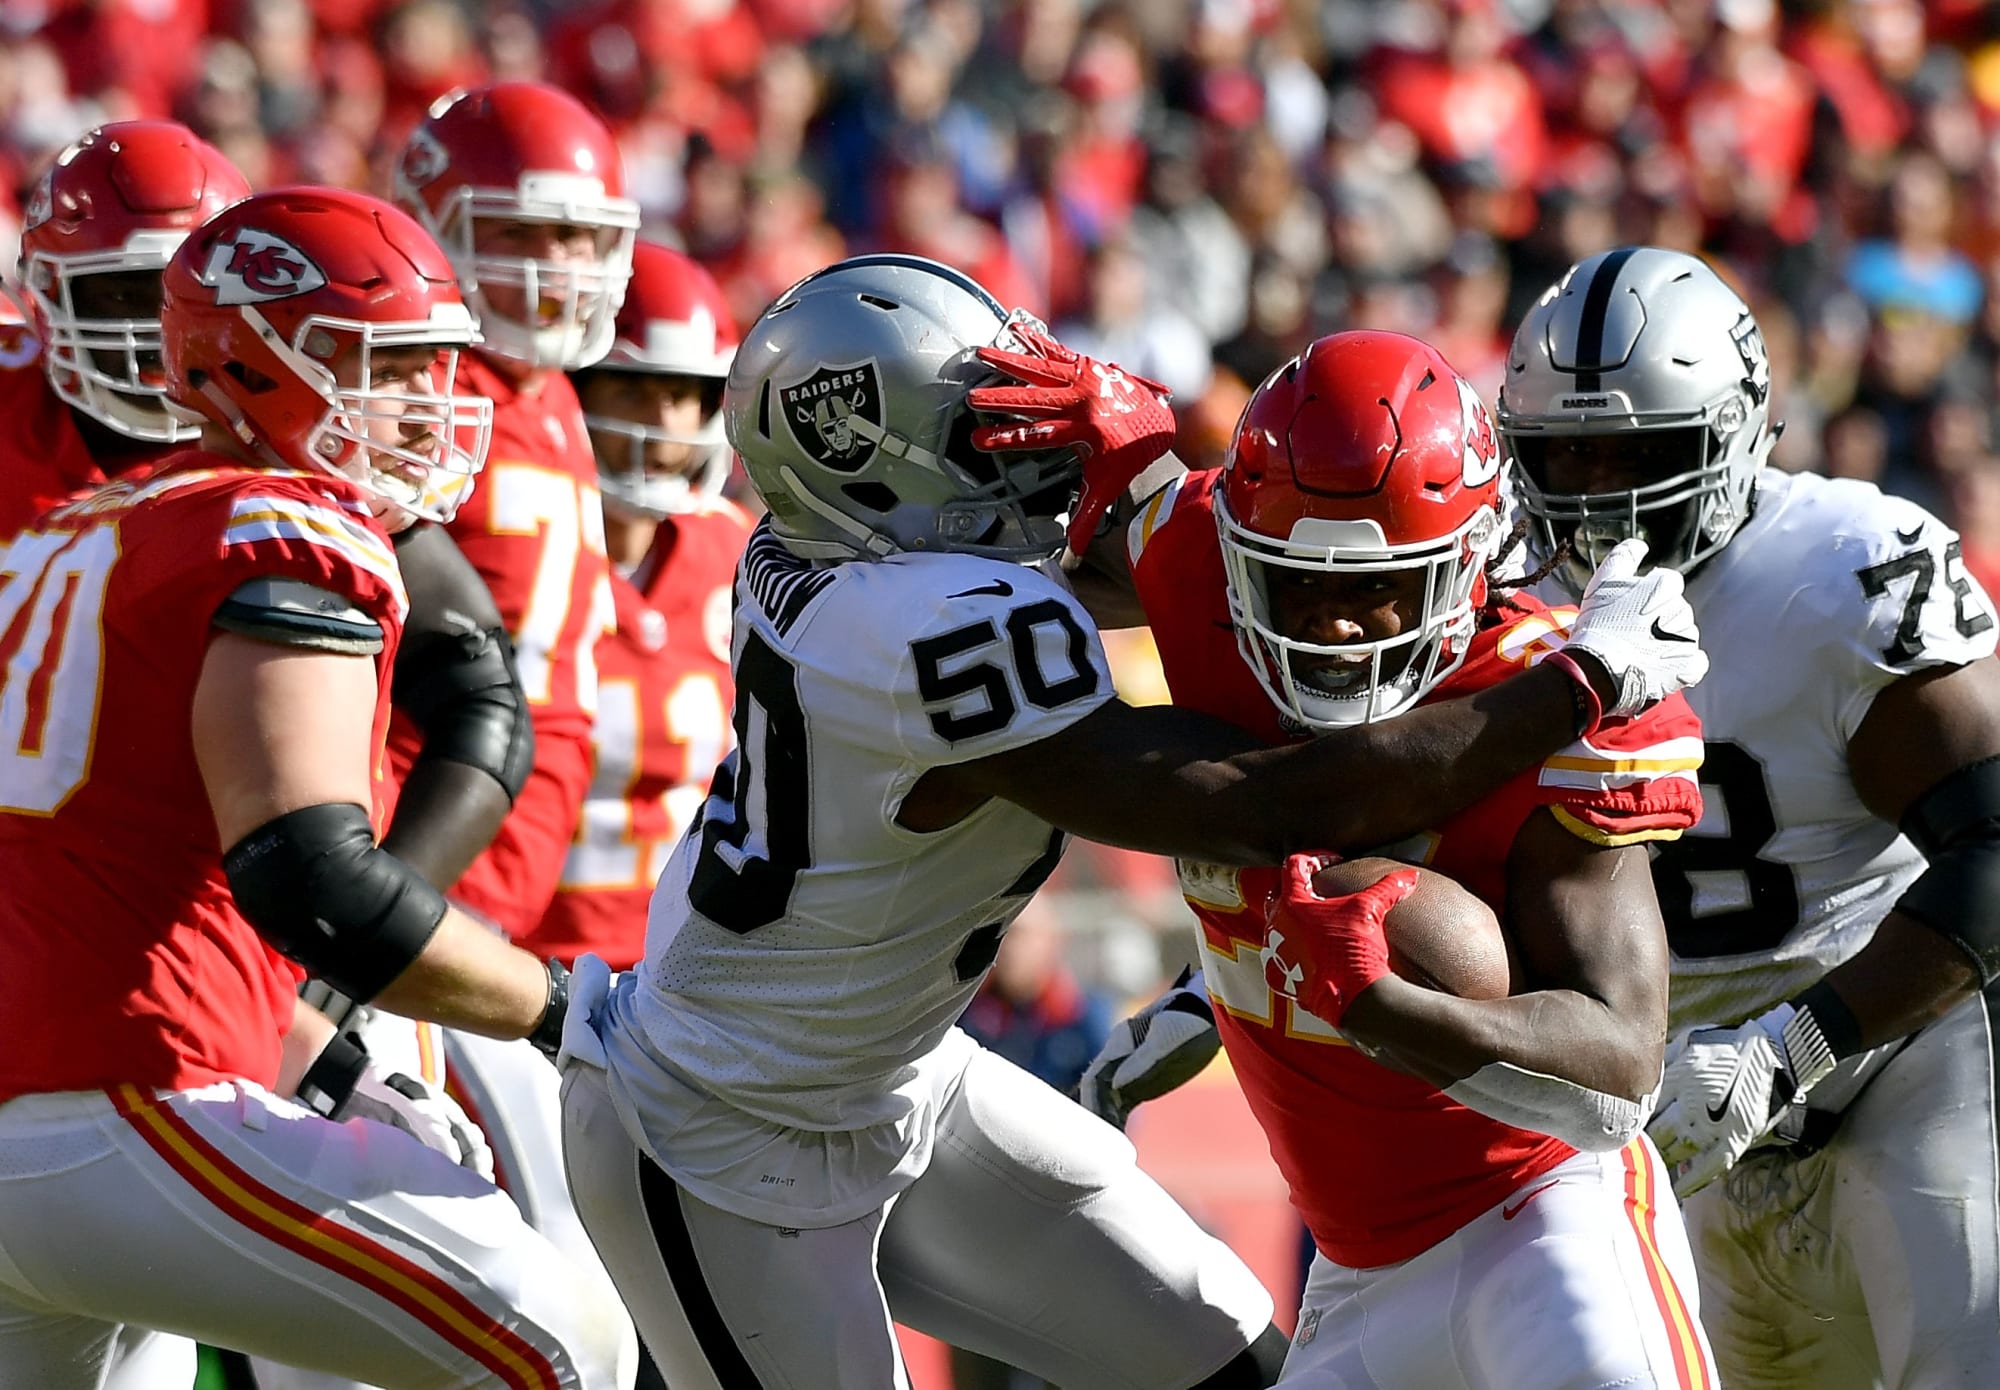 Raiders drop huge rivalry game to Chiefs, 2615 Highlights, recap